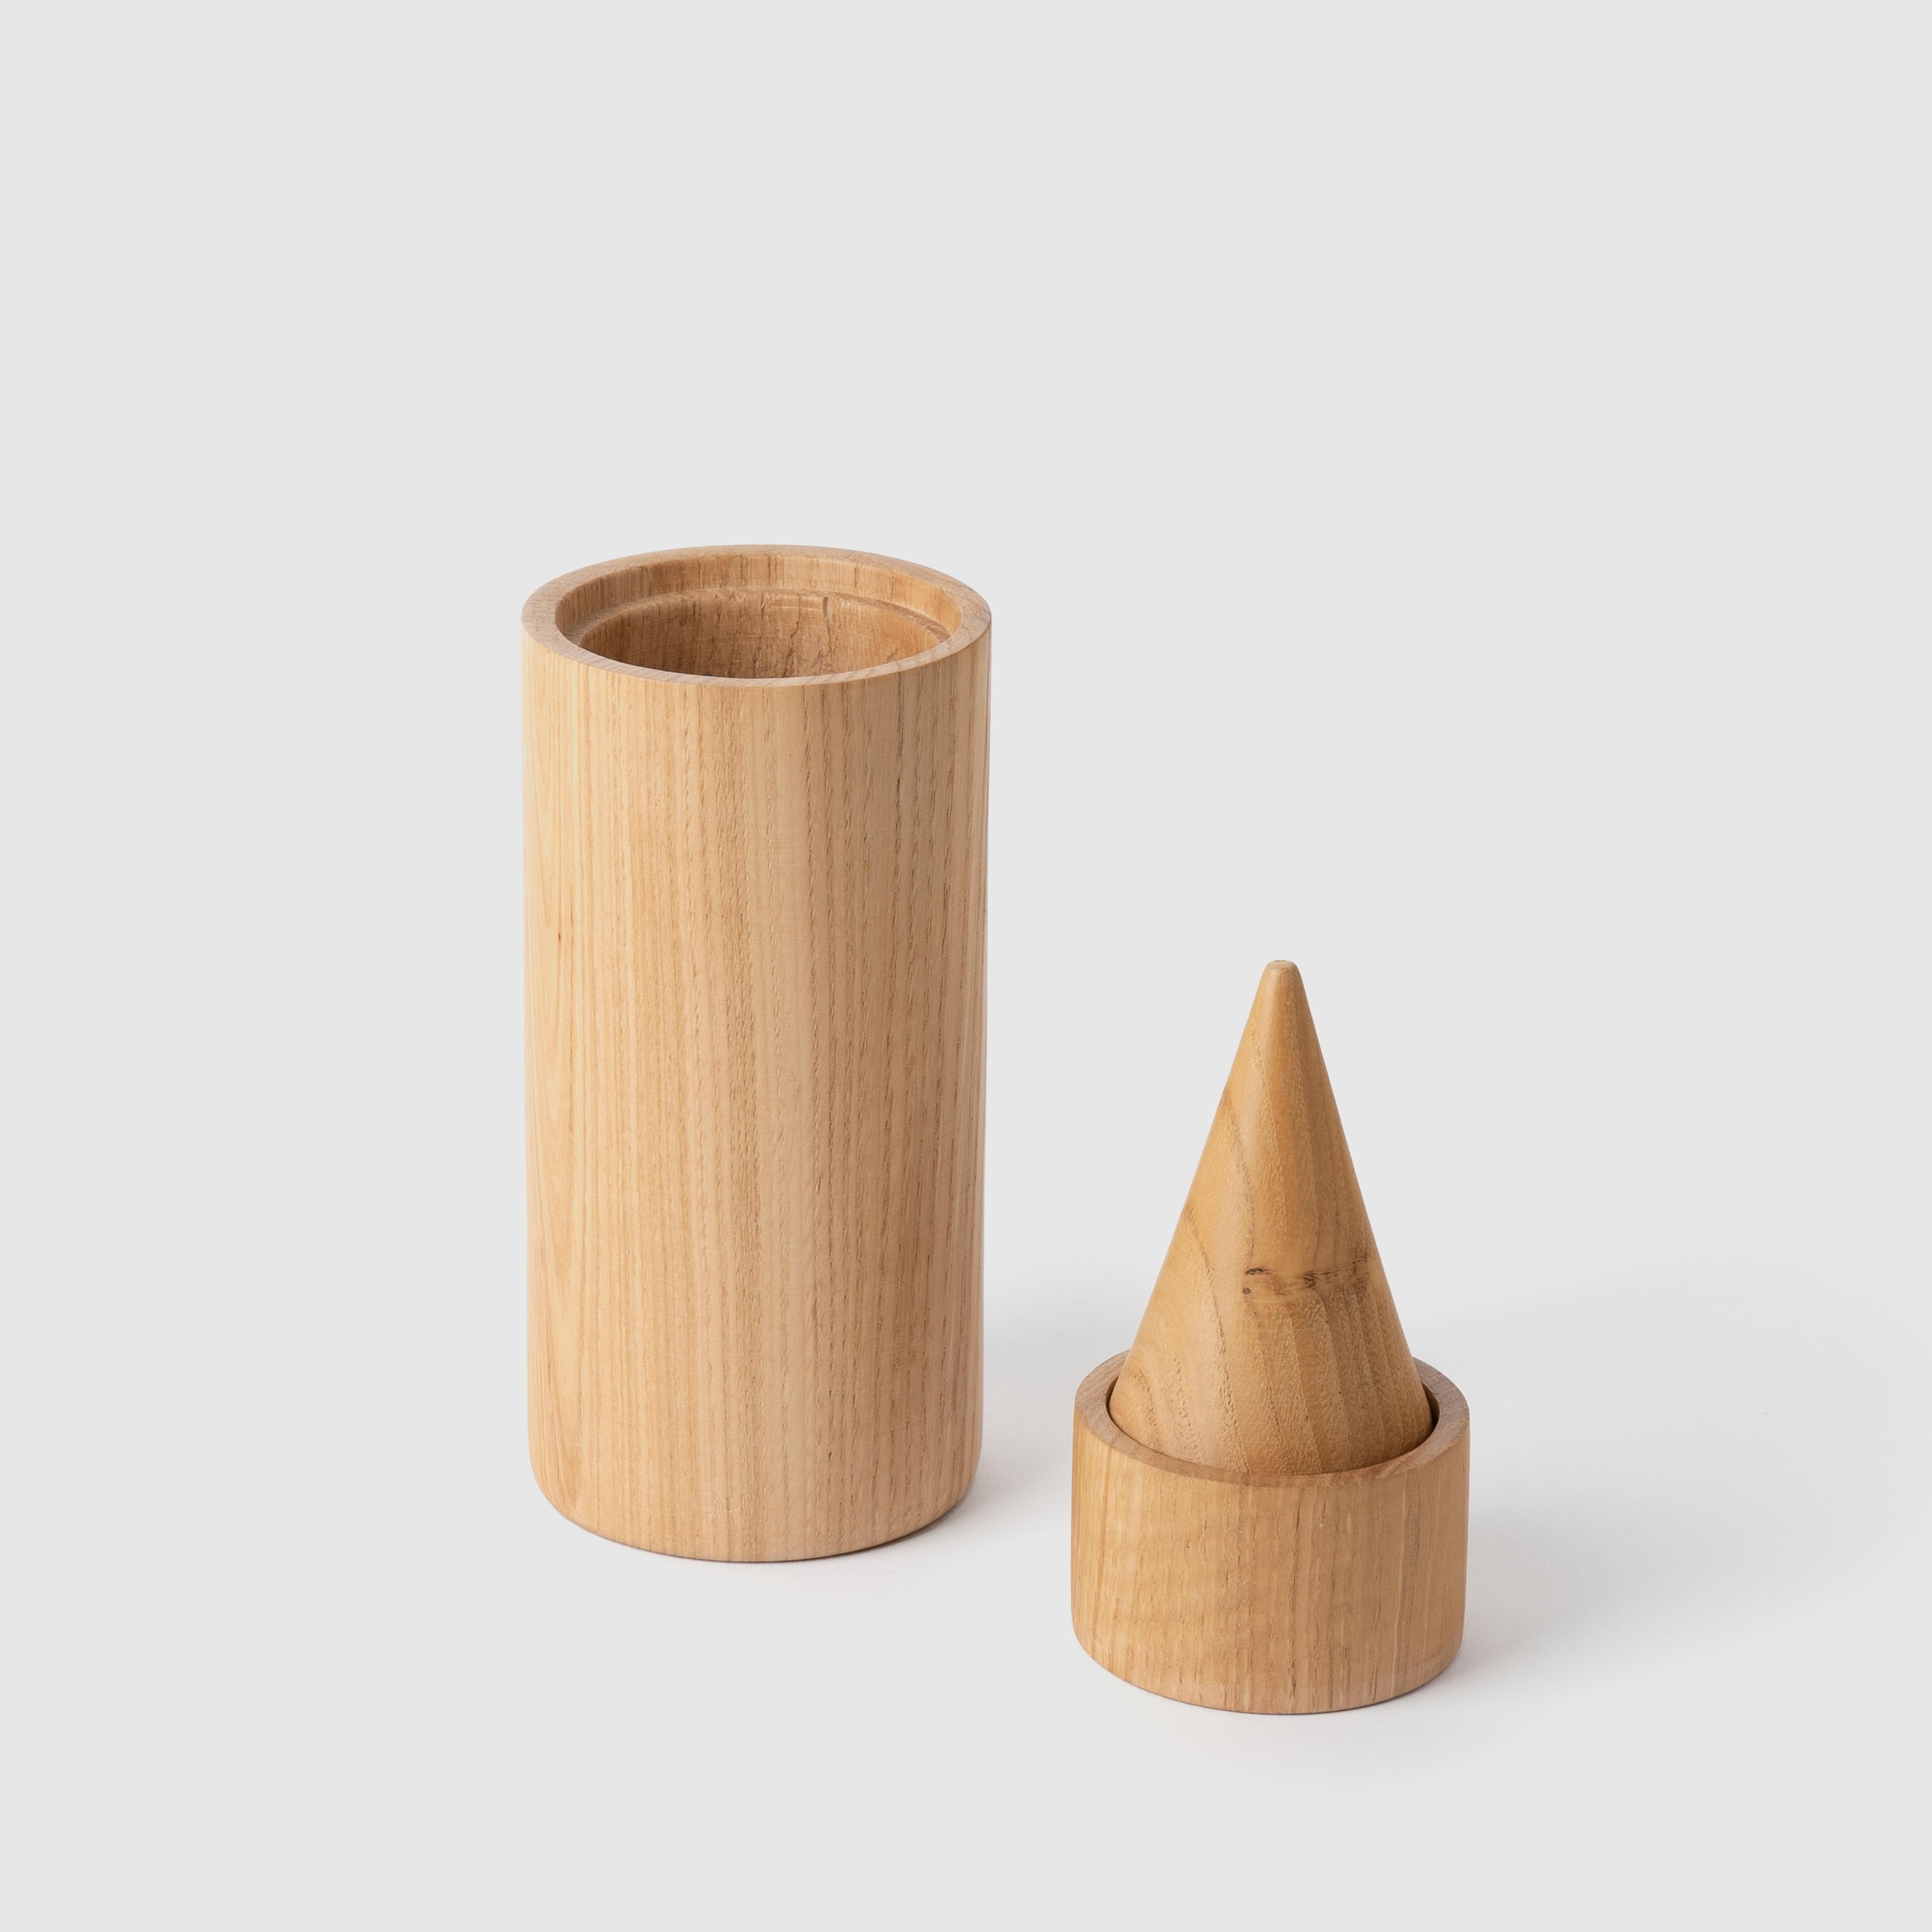 Istanbul is a wooden box collection inspired by some of towns most iconic buildings: Galata Tower, Hagia Sophia and Bebek Mosque. Each item takes its name from these structures. The main idea in the design is to reduce architectural structures to